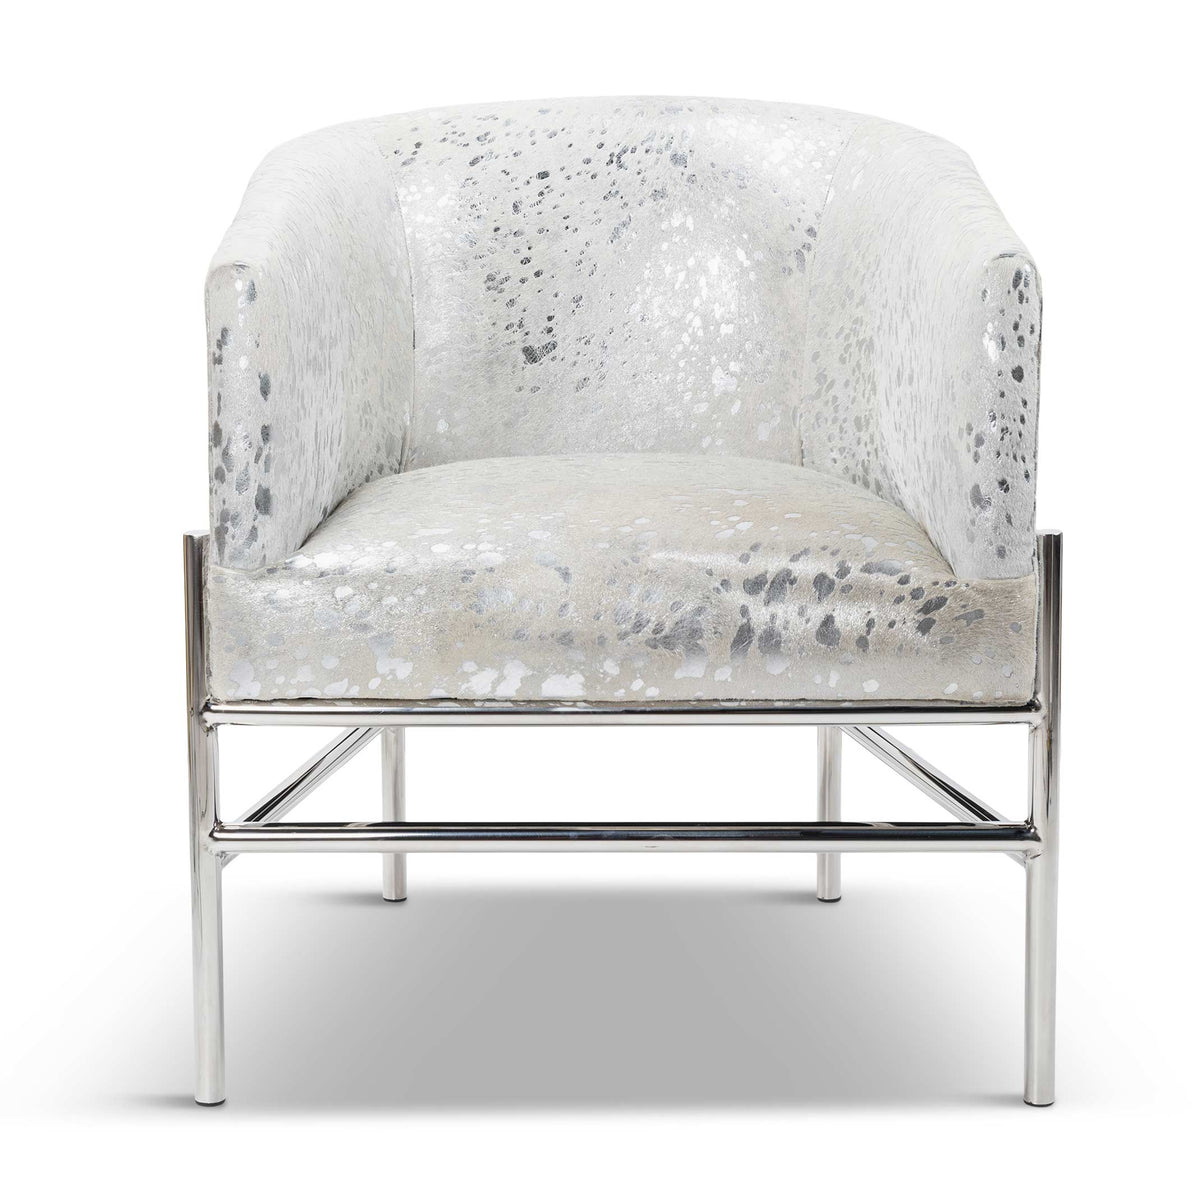 Capri Dining Chair in Silver Speckled Cowhide